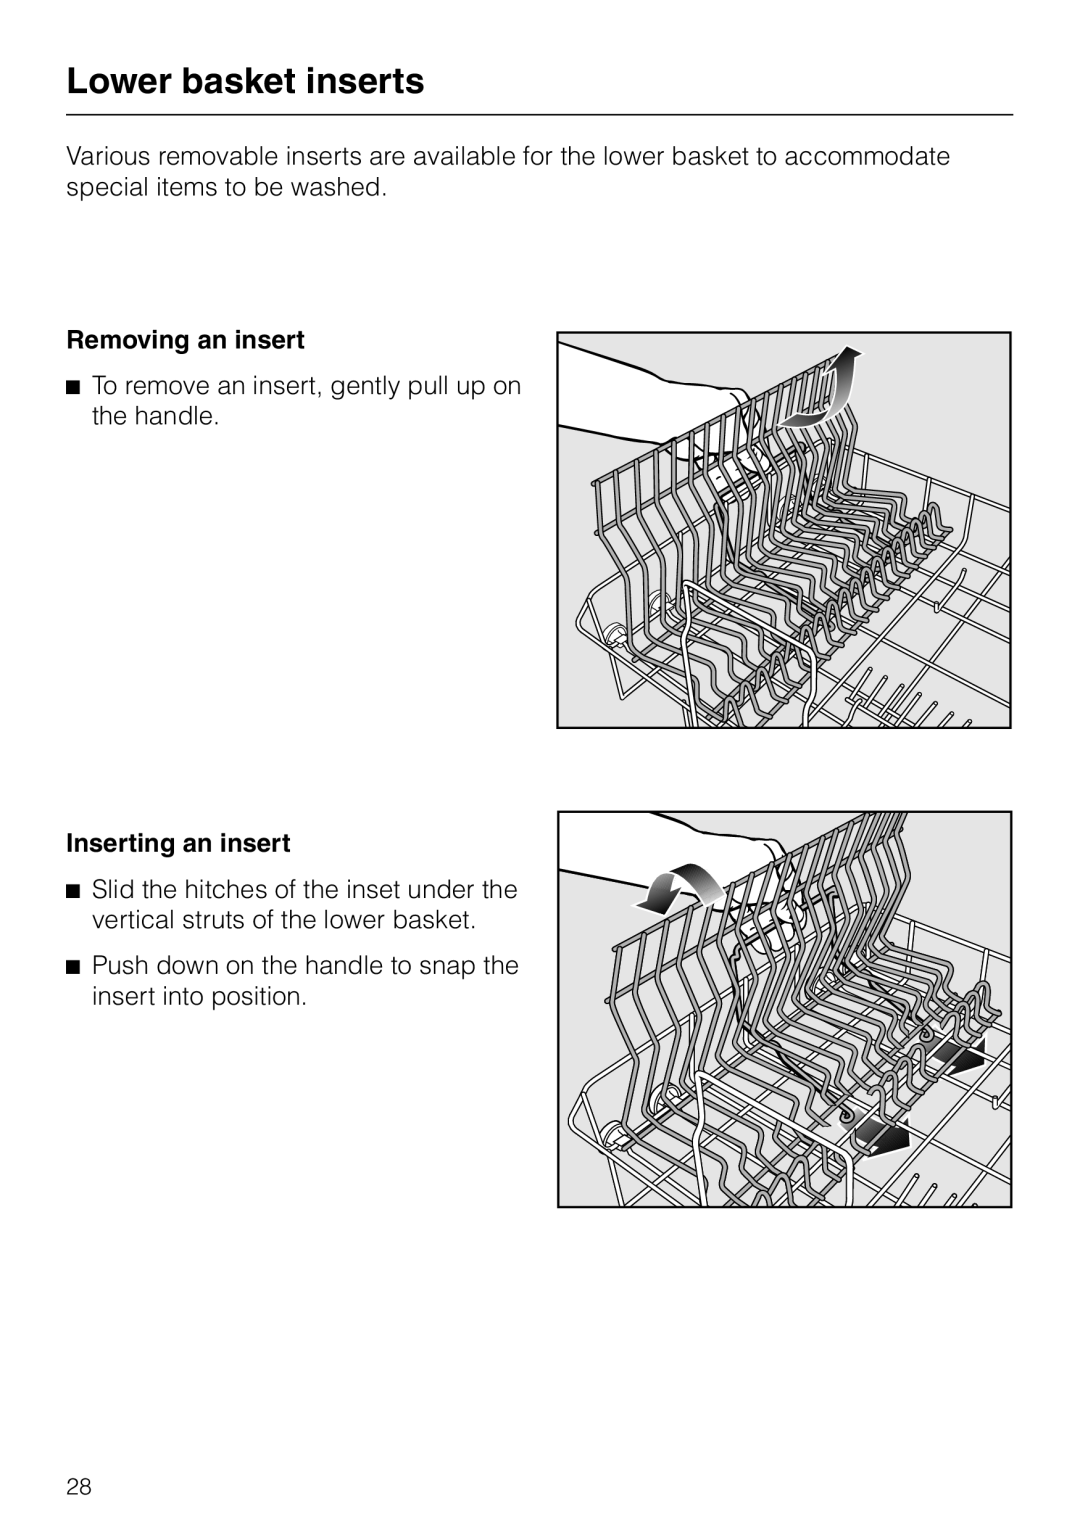 Miele G 851 SC Plus operating instructions Lower basket inserts, Removing an insert, Inserting an insert 